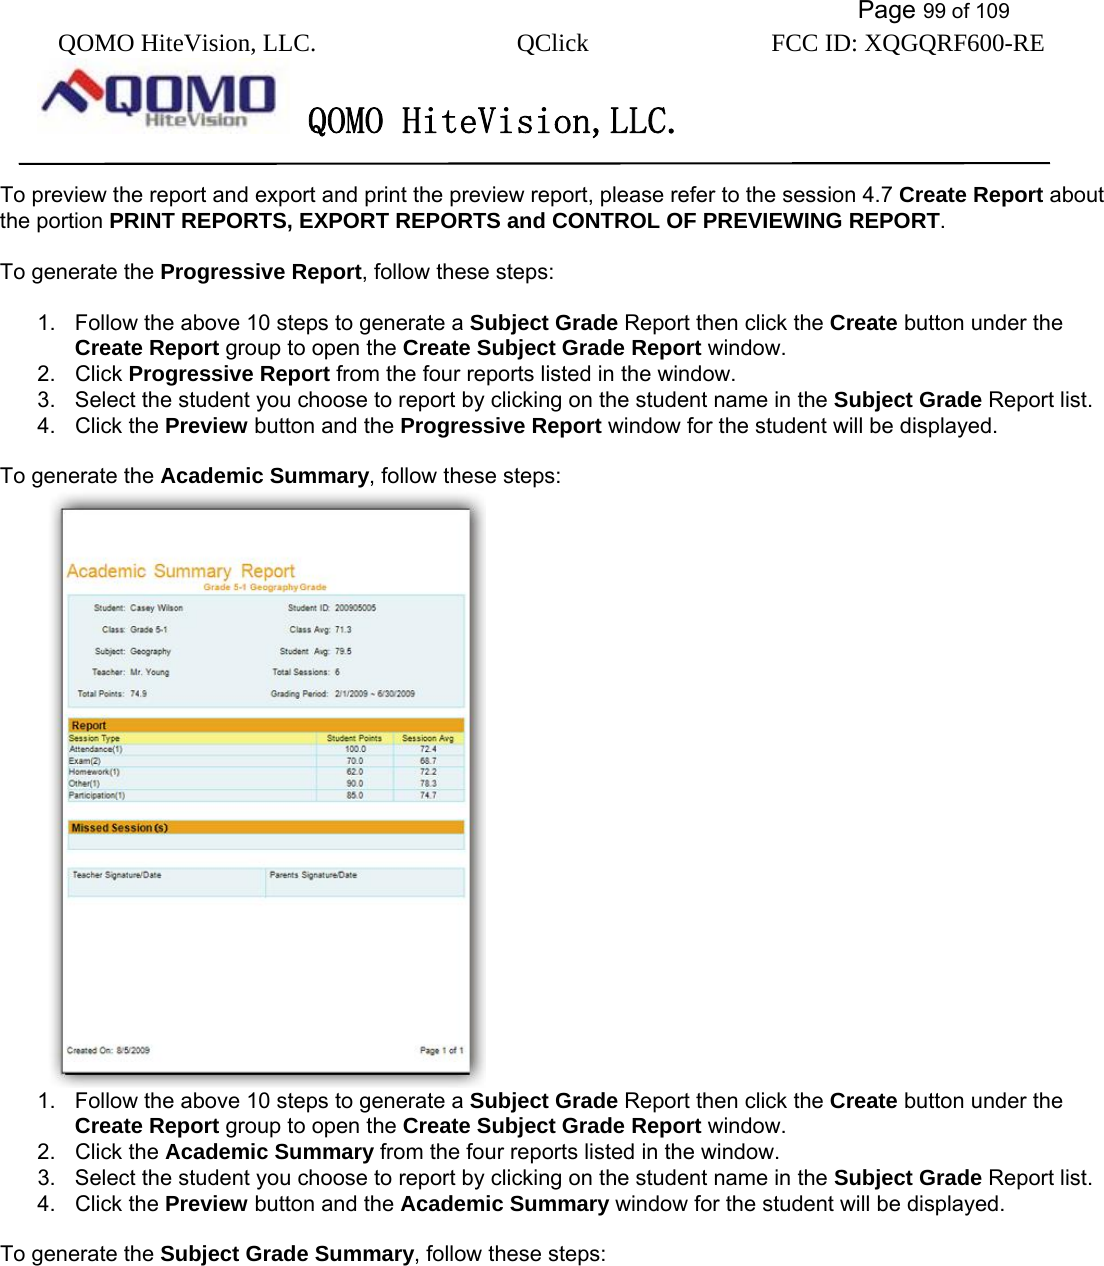           Page 99 of 109 QOMO HiteVision, LLC.  QClick        FCC ID: XQGQRF600-RE     QOMO HiteVision,LLC.   To preview the report and export and print the preview report, please refer to the session 4.7 Create Report about the portion PRINT REPORTS, EXPORT REPORTS and CONTROL OF PREVIEWING REPORT.  To generate the Progressive Report, follow these steps:  1.  Follow the above 10 steps to generate a Subject Grade Report then click the Create button under the Create Report group to open the Create Subject Grade Report window. 2. Click Progressive Report from the four reports listed in the window. 3.  Select the student you choose to report by clicking on the student name in the Subject Grade Report list. 4. Click the Preview button and the Progressive Report window for the student will be displayed.  To generate the Academic Summary, follow these steps:  1.  Follow the above 10 steps to generate a Subject Grade Report then click the Create button under the Create Report group to open the Create Subject Grade Report window. 2. Click the Academic Summary from the four reports listed in the window. 3.  Select the student you choose to report by clicking on the student name in the Subject Grade Report list. 4. Click the Preview button and the Academic Summary window for the student will be displayed.  To generate the Subject Grade Summary, follow these steps: 